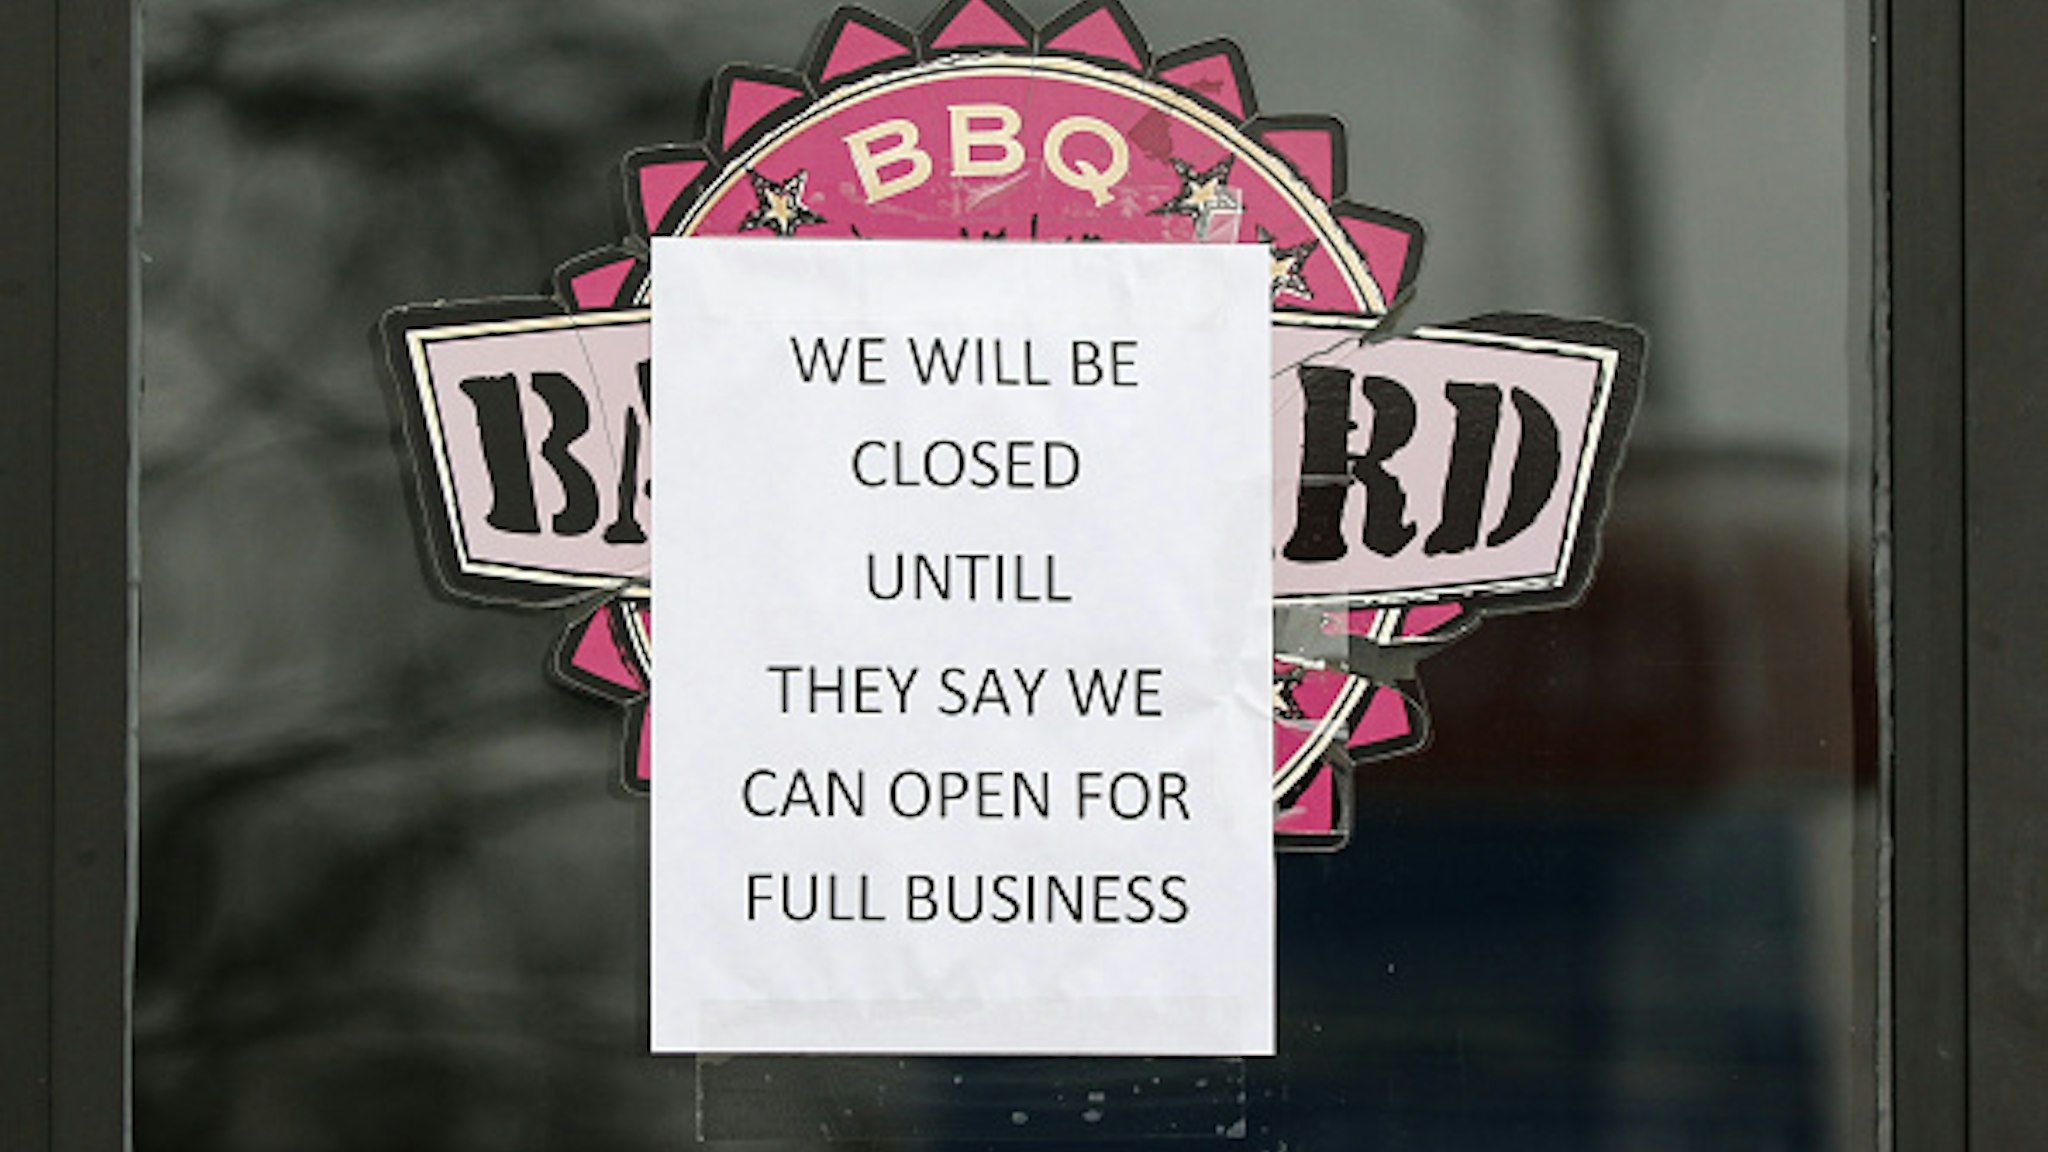 TOLEDO, OH - MARCH 24: A sign stating that a restaurant is closed is seen during the stay-at-home order issued by Ohio Gov. Mike DeWine during the coronavirus COVID-19 outbreak on March 24, 2020 in Toledo, Ohio.